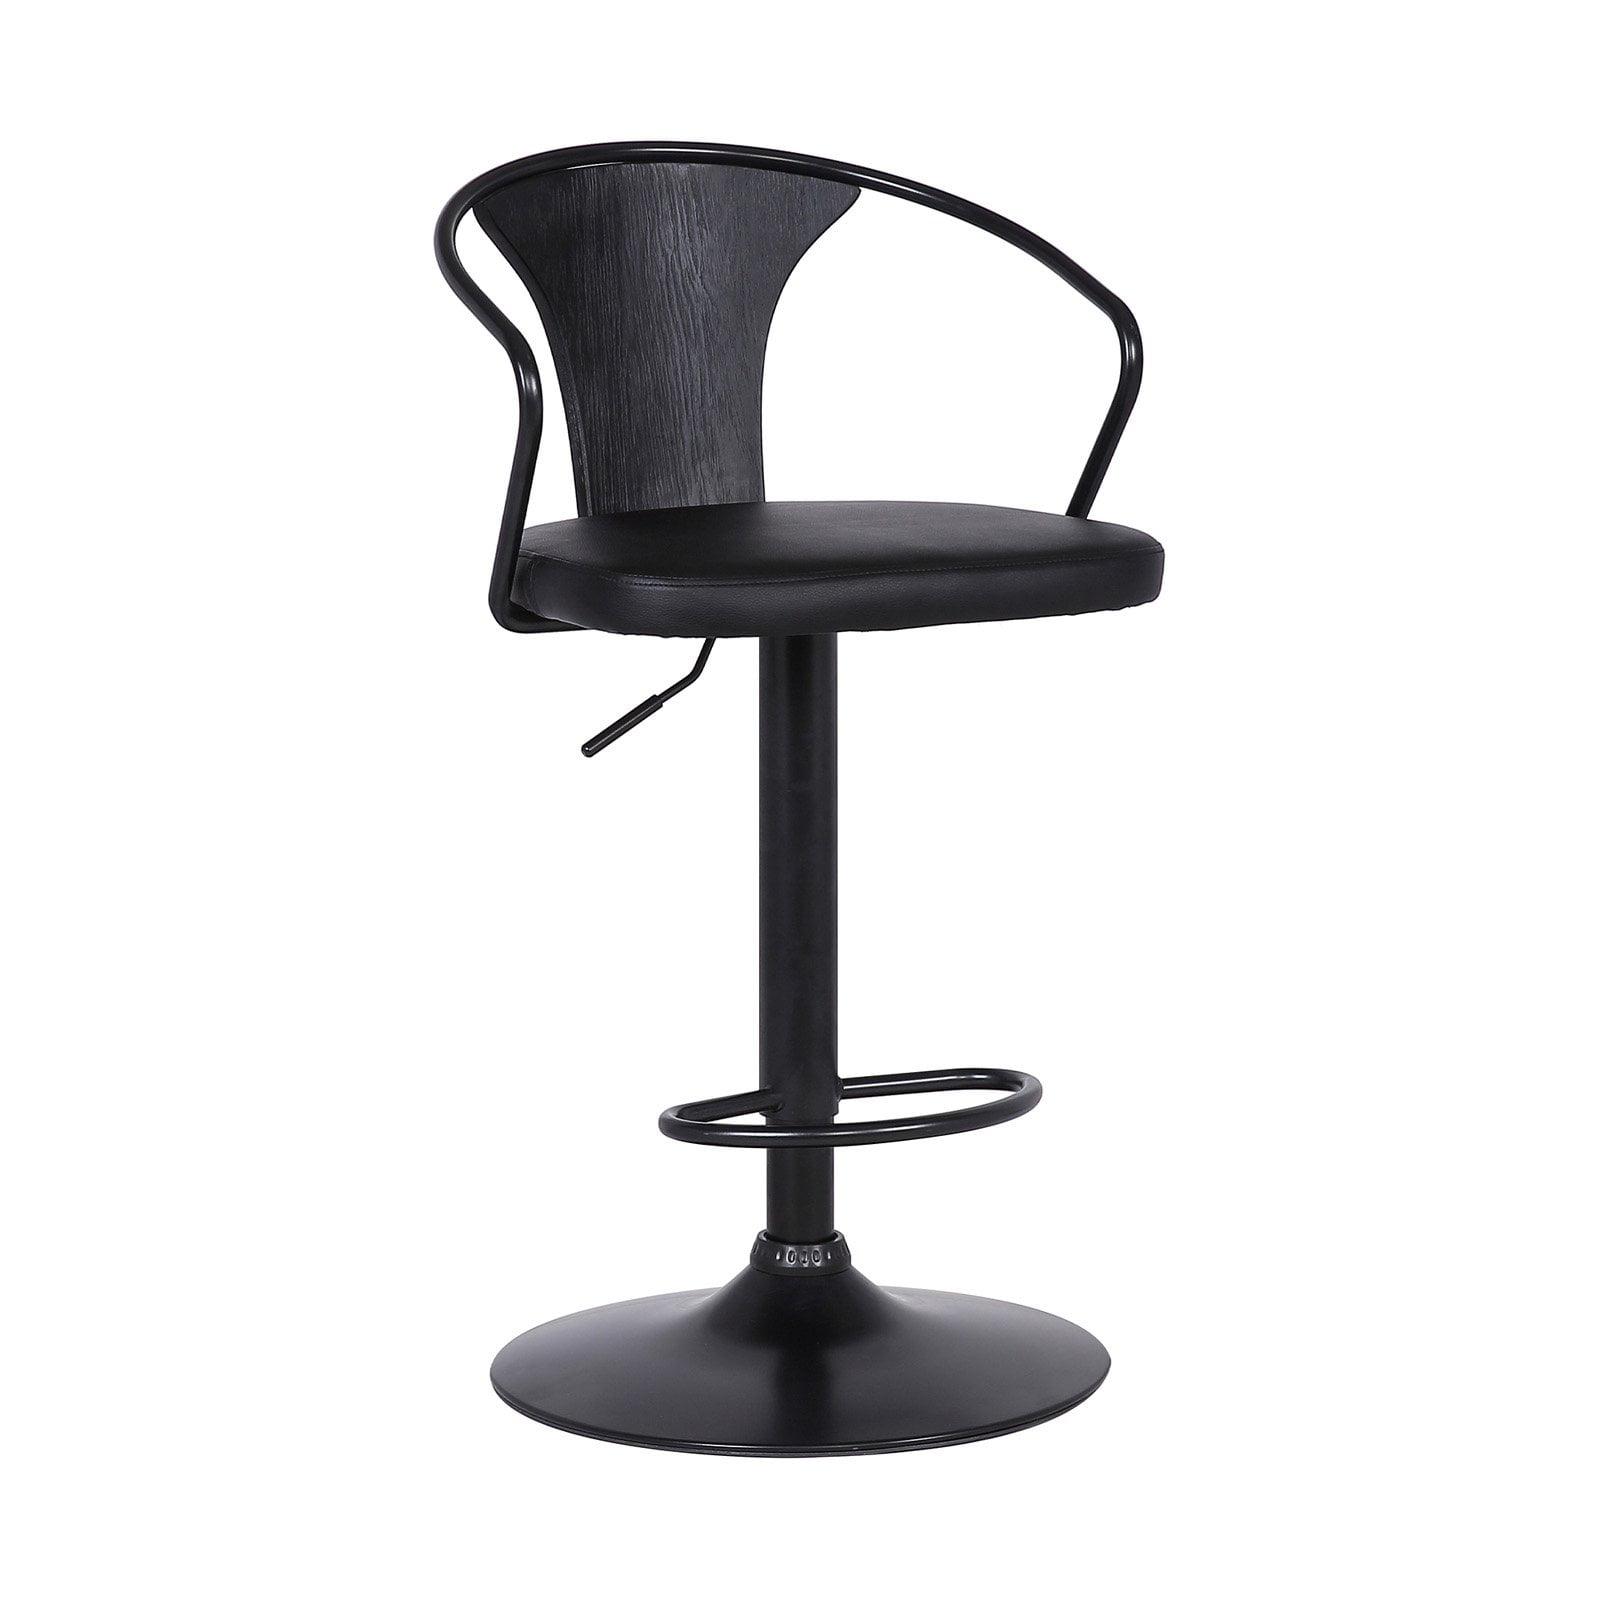 Eagle Contemporary Adjustable Swivel Barstool in Black Leather and Metal